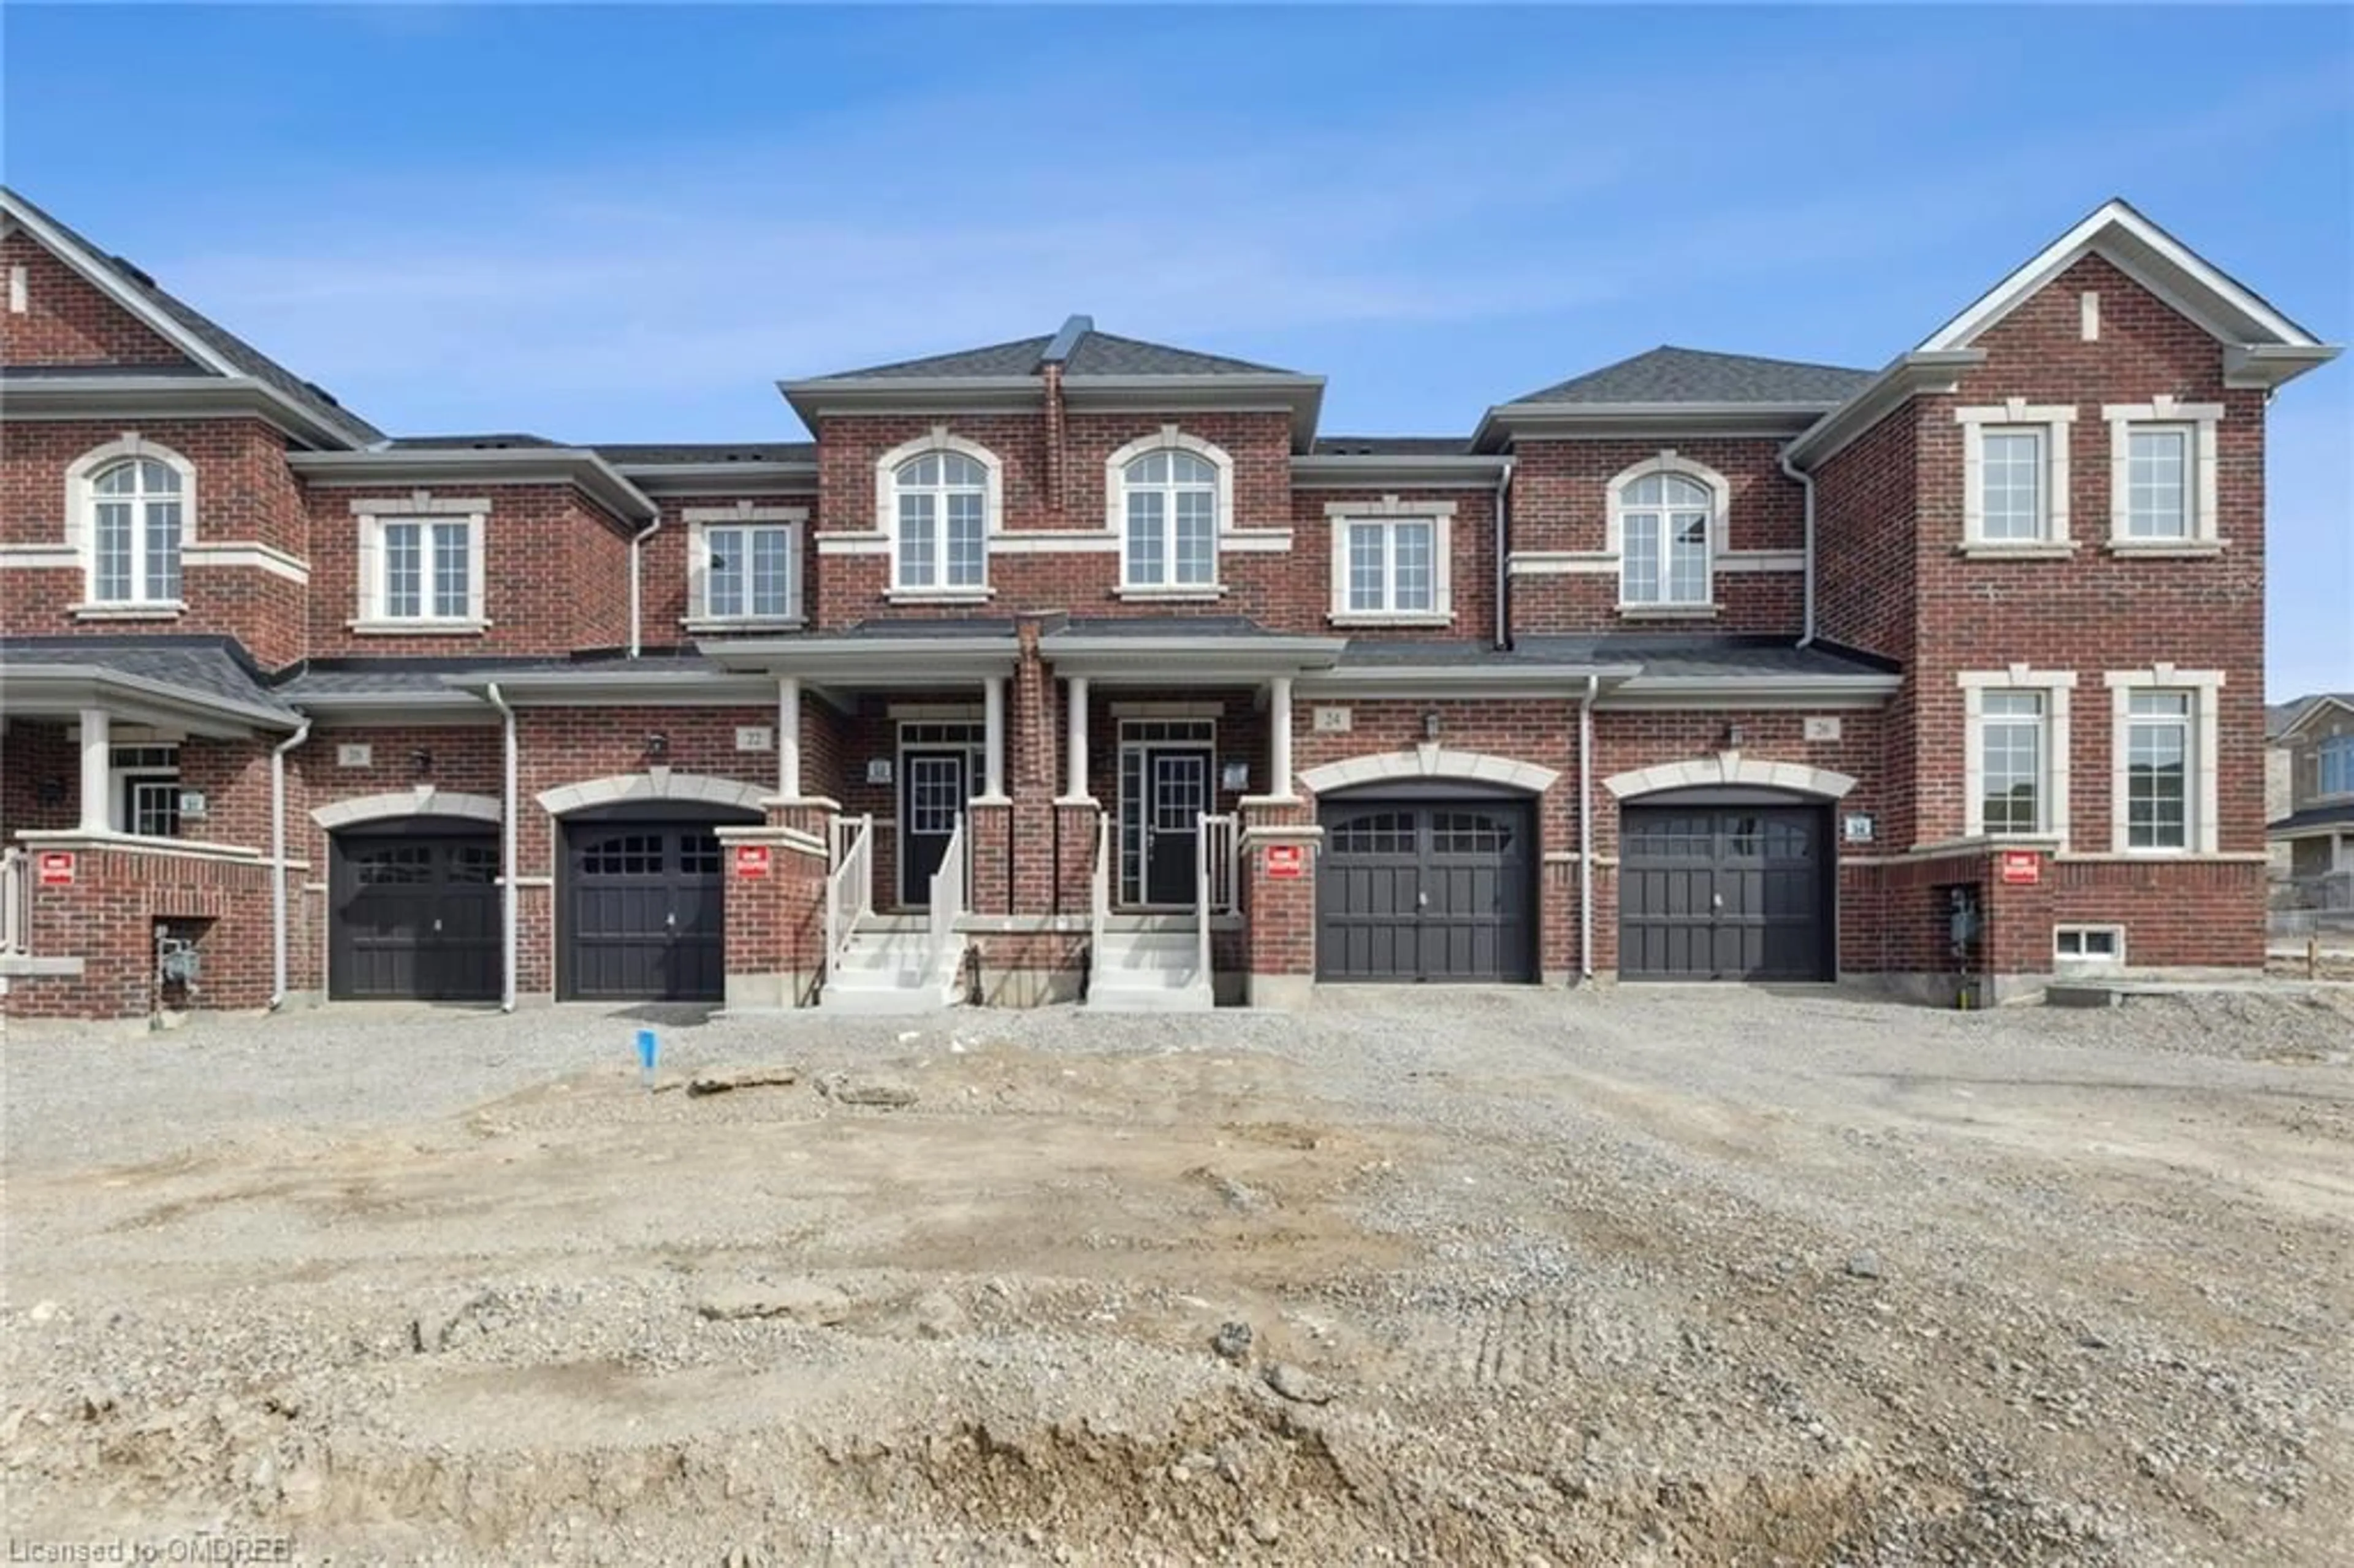 Home with brick exterior material for 24 Lidstone St, Cambridge Ontario N1T 0G3